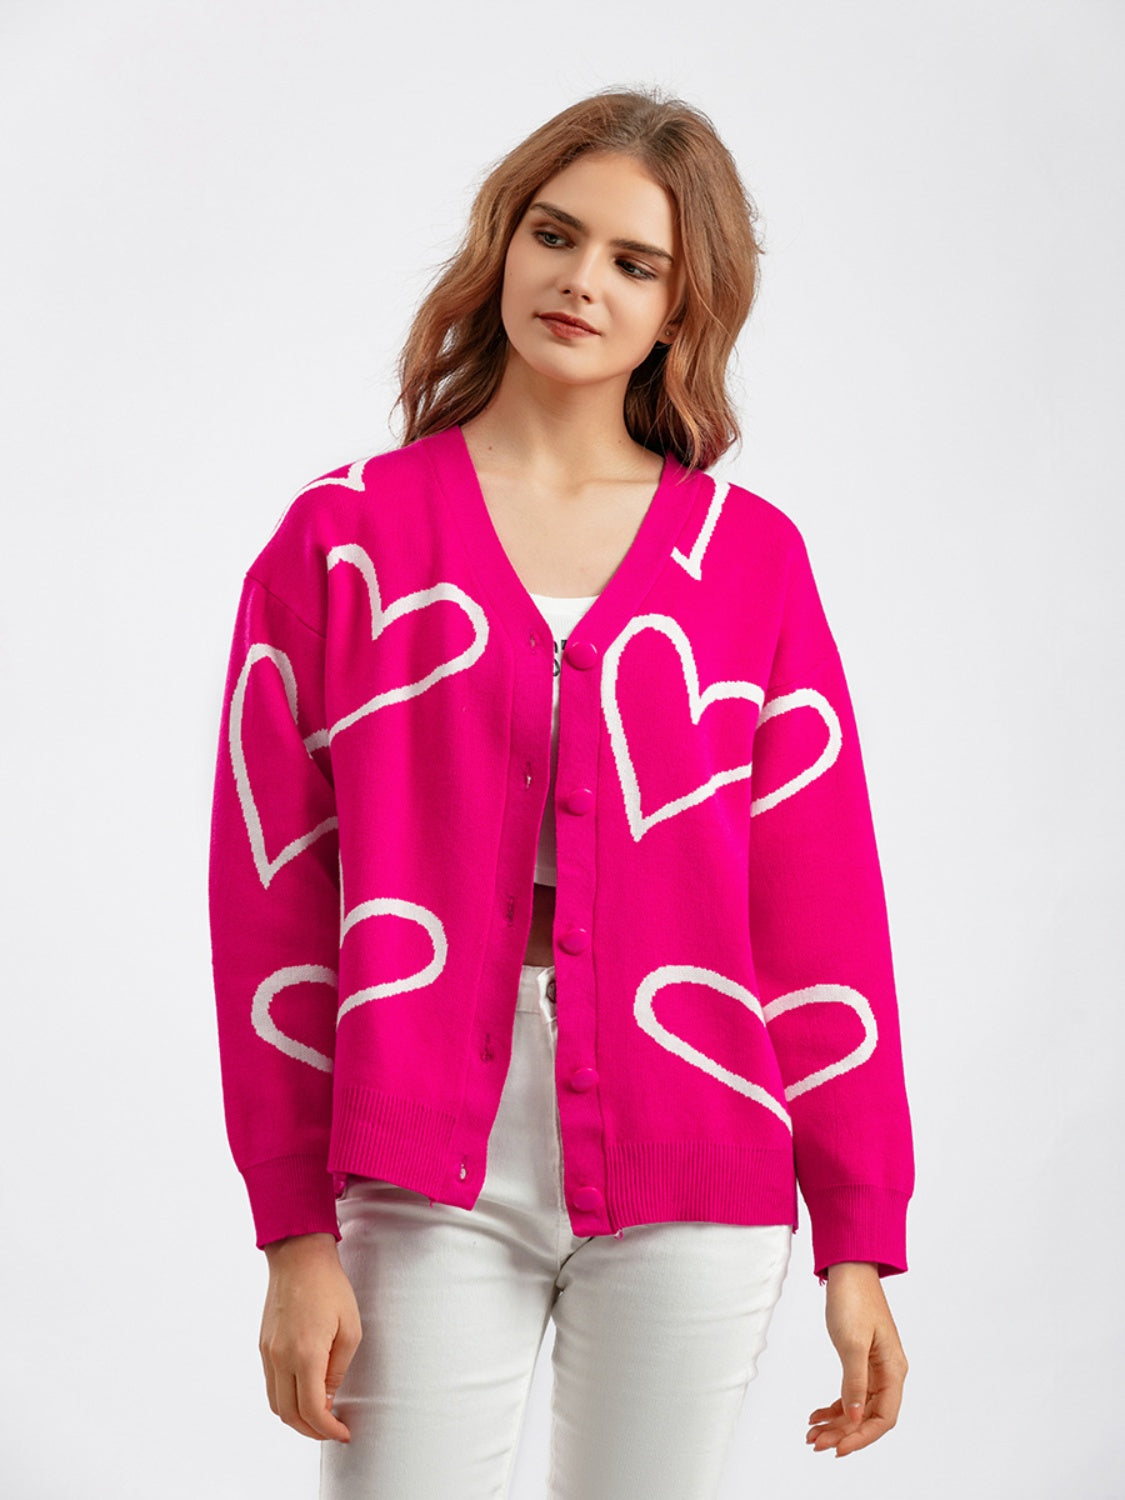 Heart Button Down Cardigan - Pink / One Size - Women’s Clothing & Accessories - Shirts & Tops - 1 - 2024